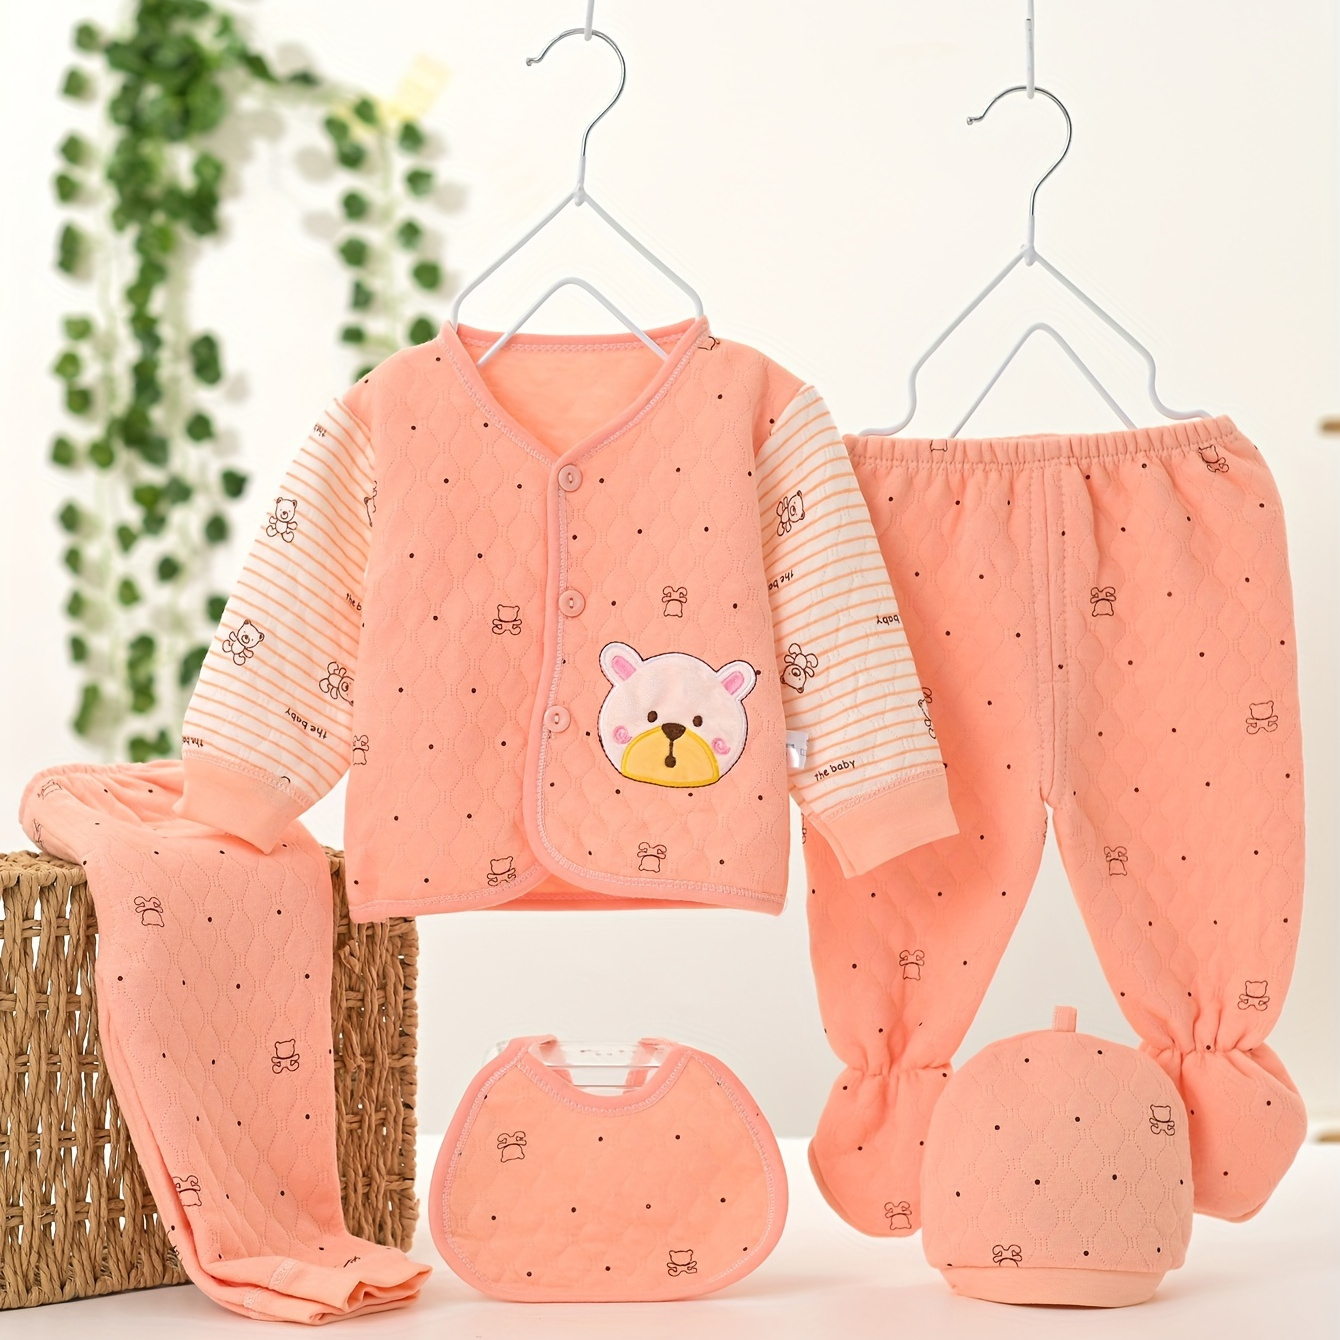 

5pcs Baby Boy's Bear Embroidered Warm Outfit, Thermal Long Sleeve Top & Bib & Footed Pants & Hat & Pants Set, Newborn's Clothing For Fall Winter, Top As Gift